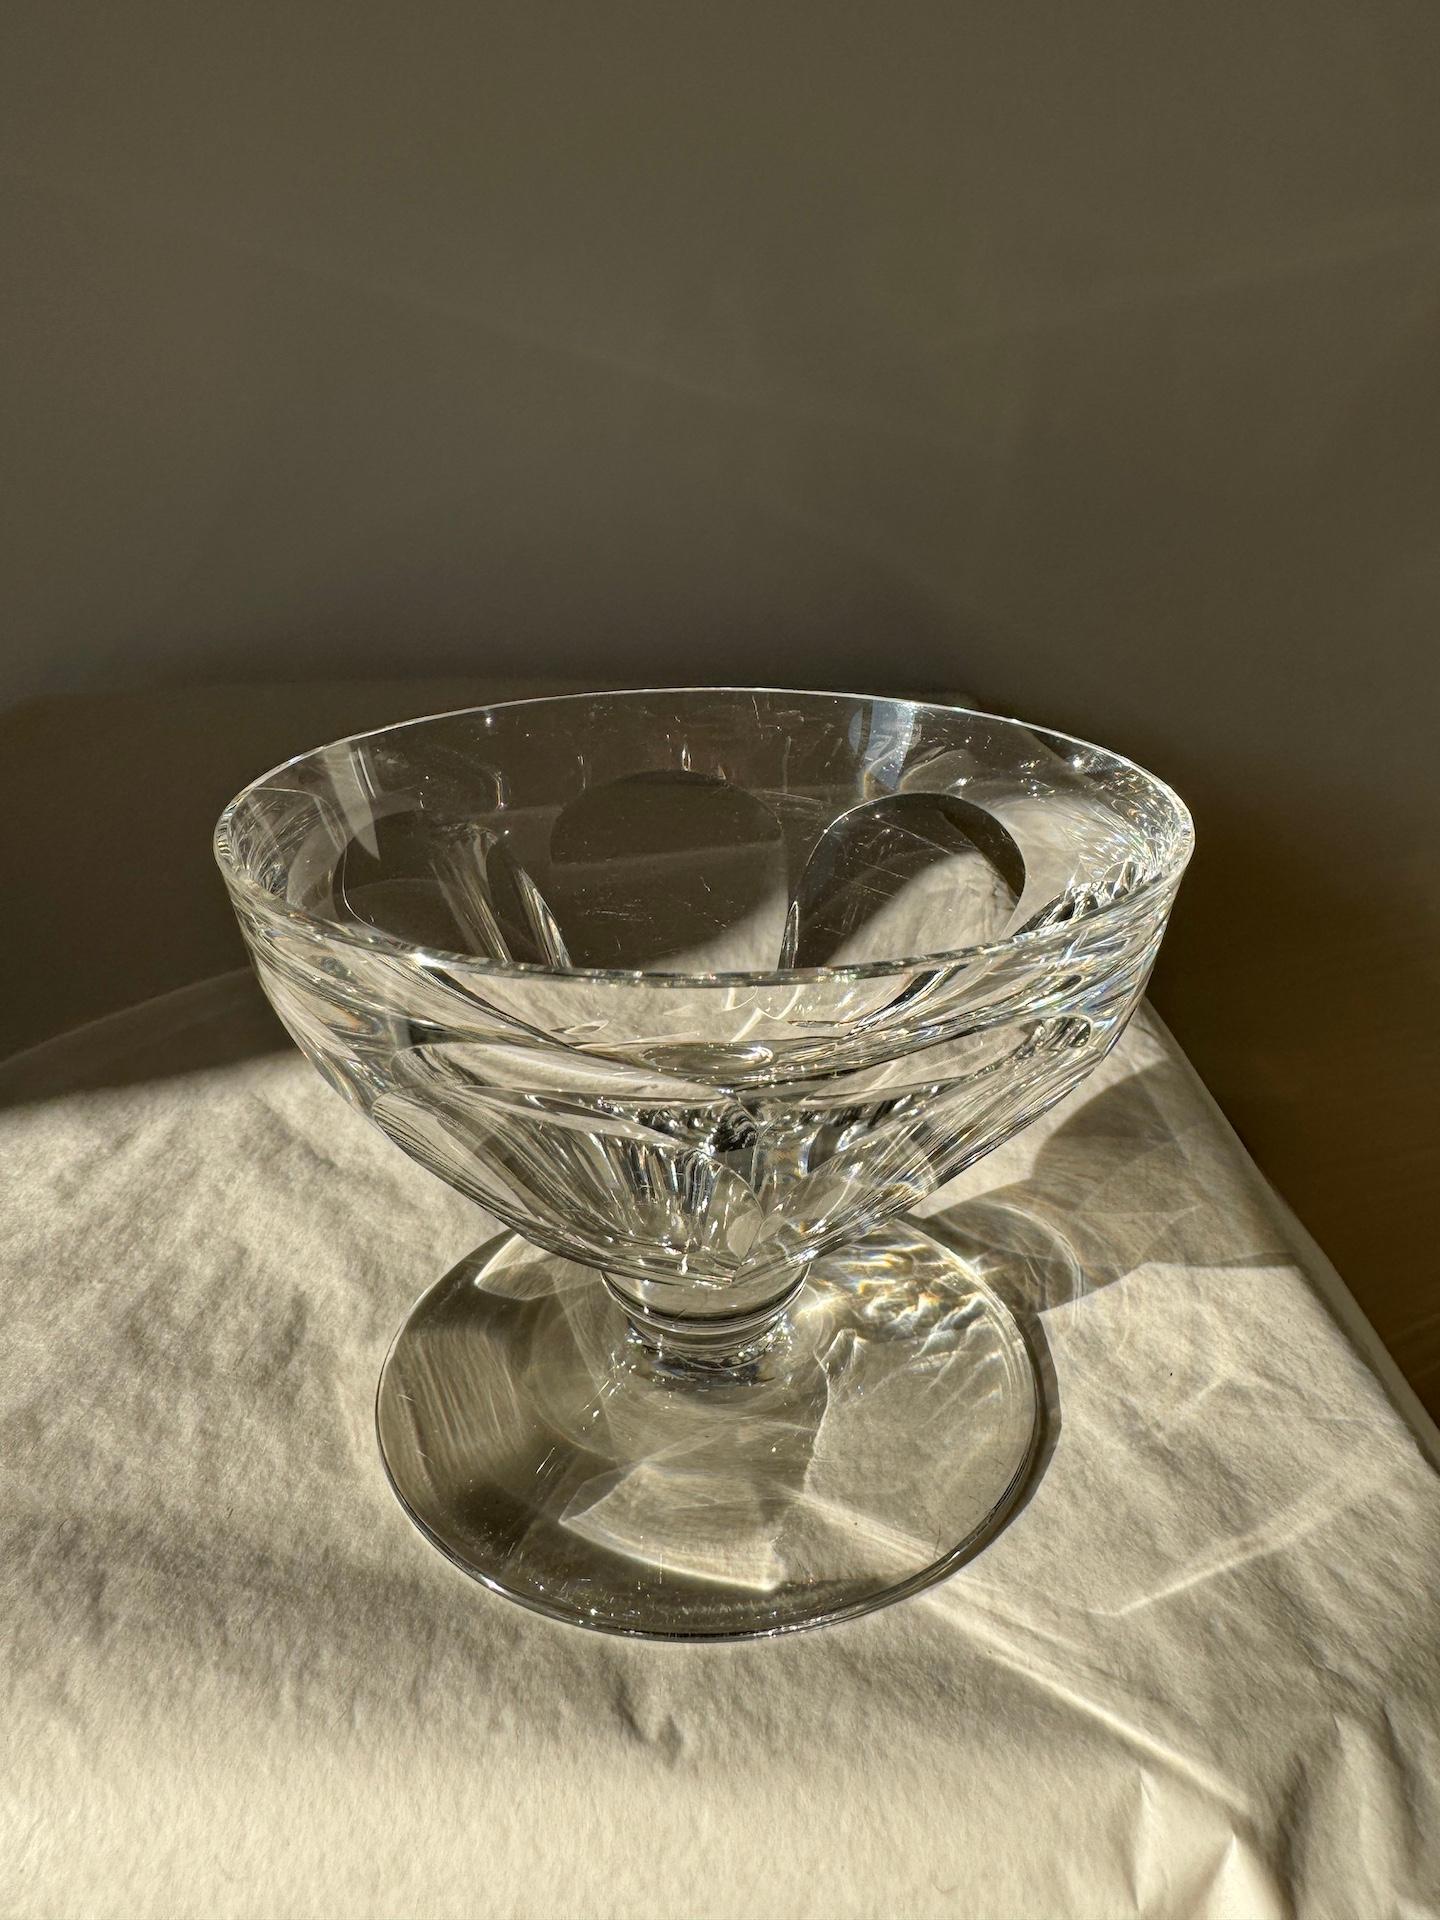 Mid-20th Century 8 Baccarat Crystal Champagne or Cocktail Glasses, Talleyrand Model, Art Deco Era For Sale